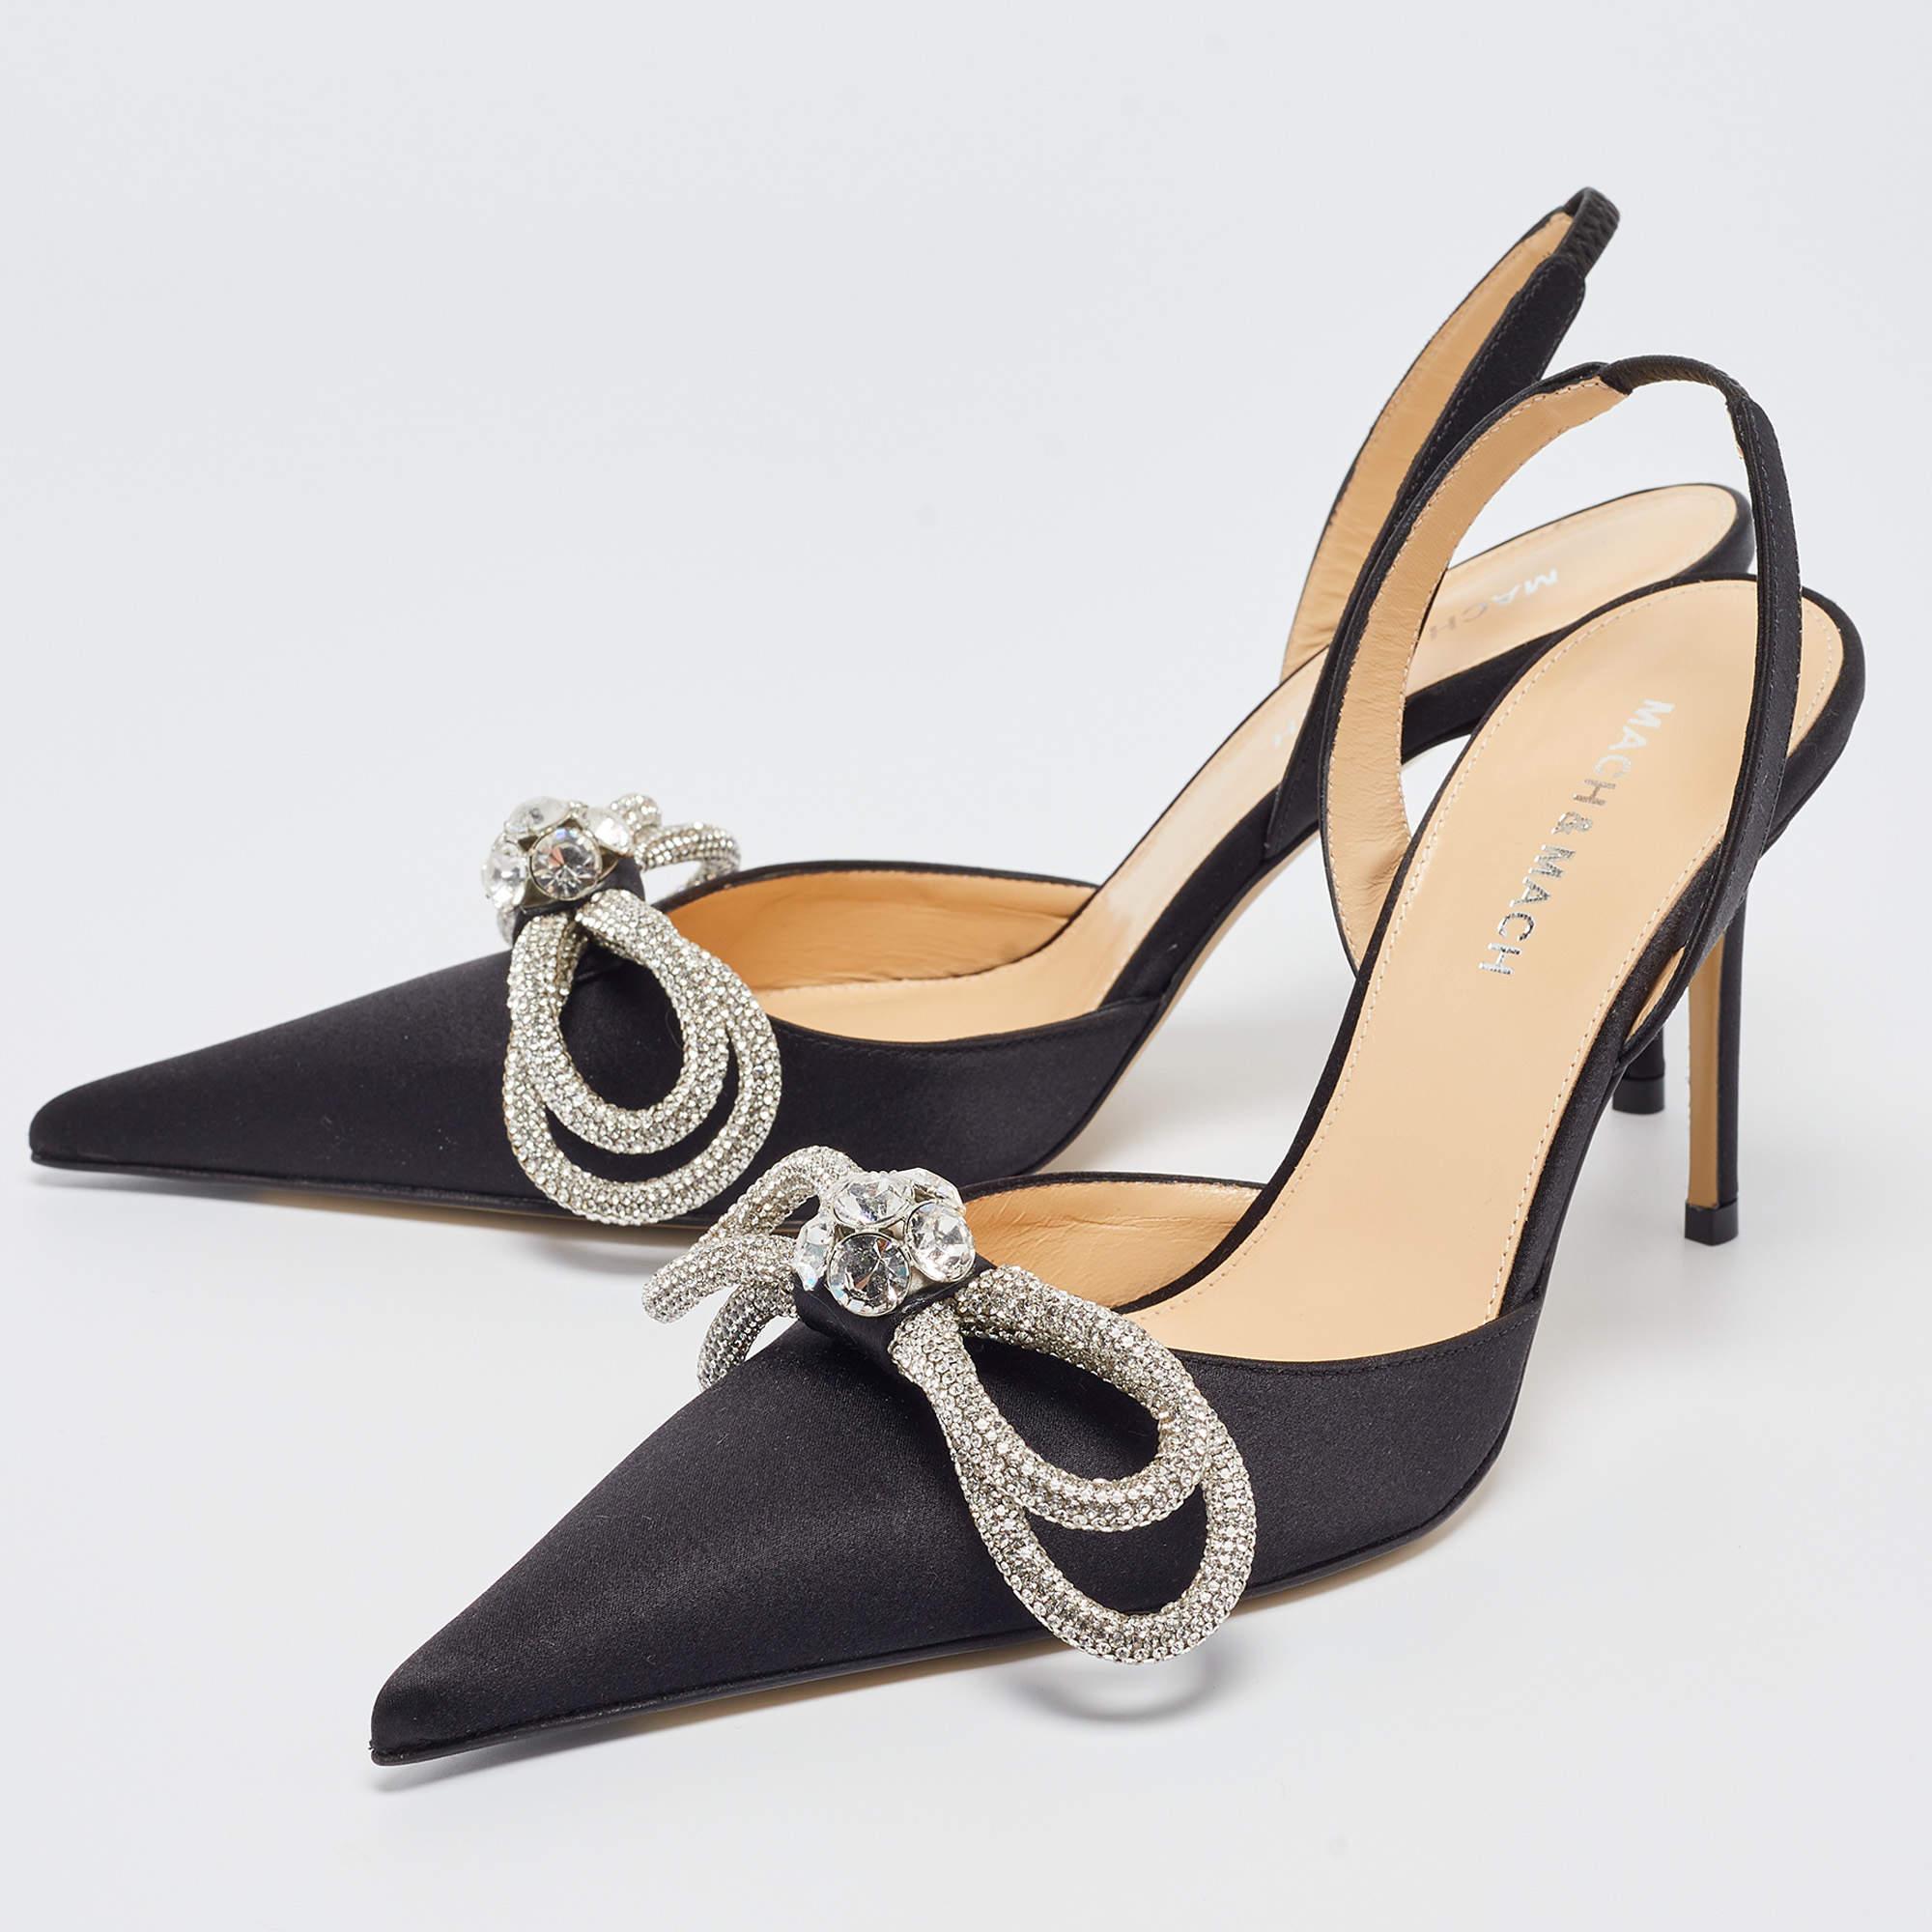 With a striking silhouette, this pair of Mach & Mach pumps is classy and peculiar. It is adorned with crystal embellishments, and its 10cm heels will elevate you with ease. Made from satin, it features a black shade and will lend you an elongated